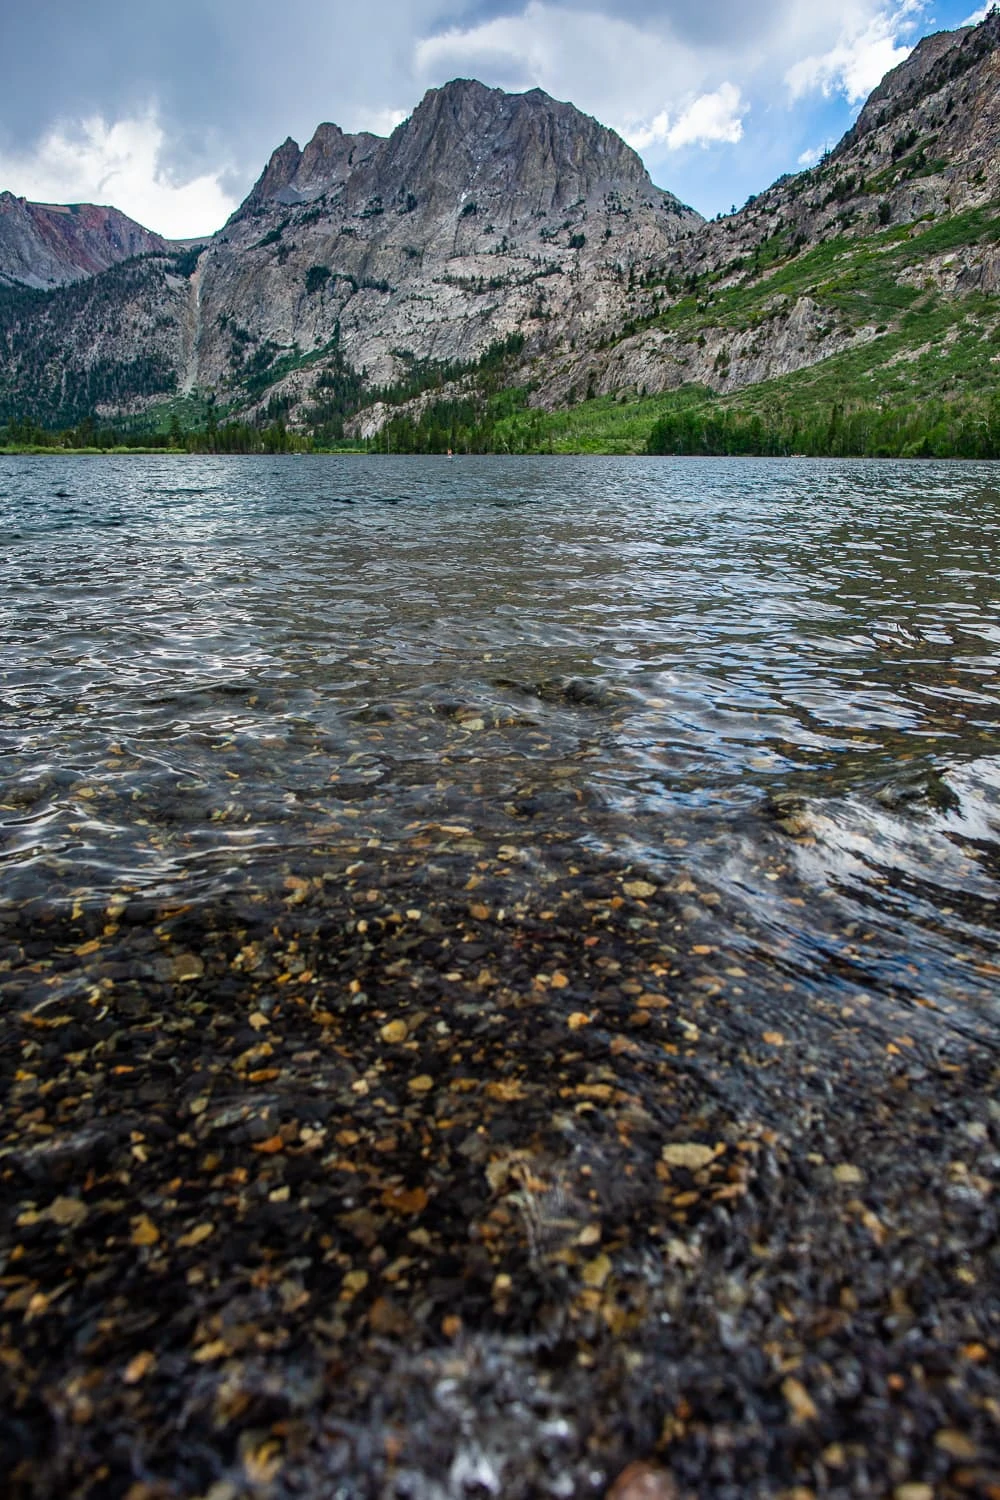 A vertical photo of Silver Lake showing the mountains and clear water over a gravel bottom.